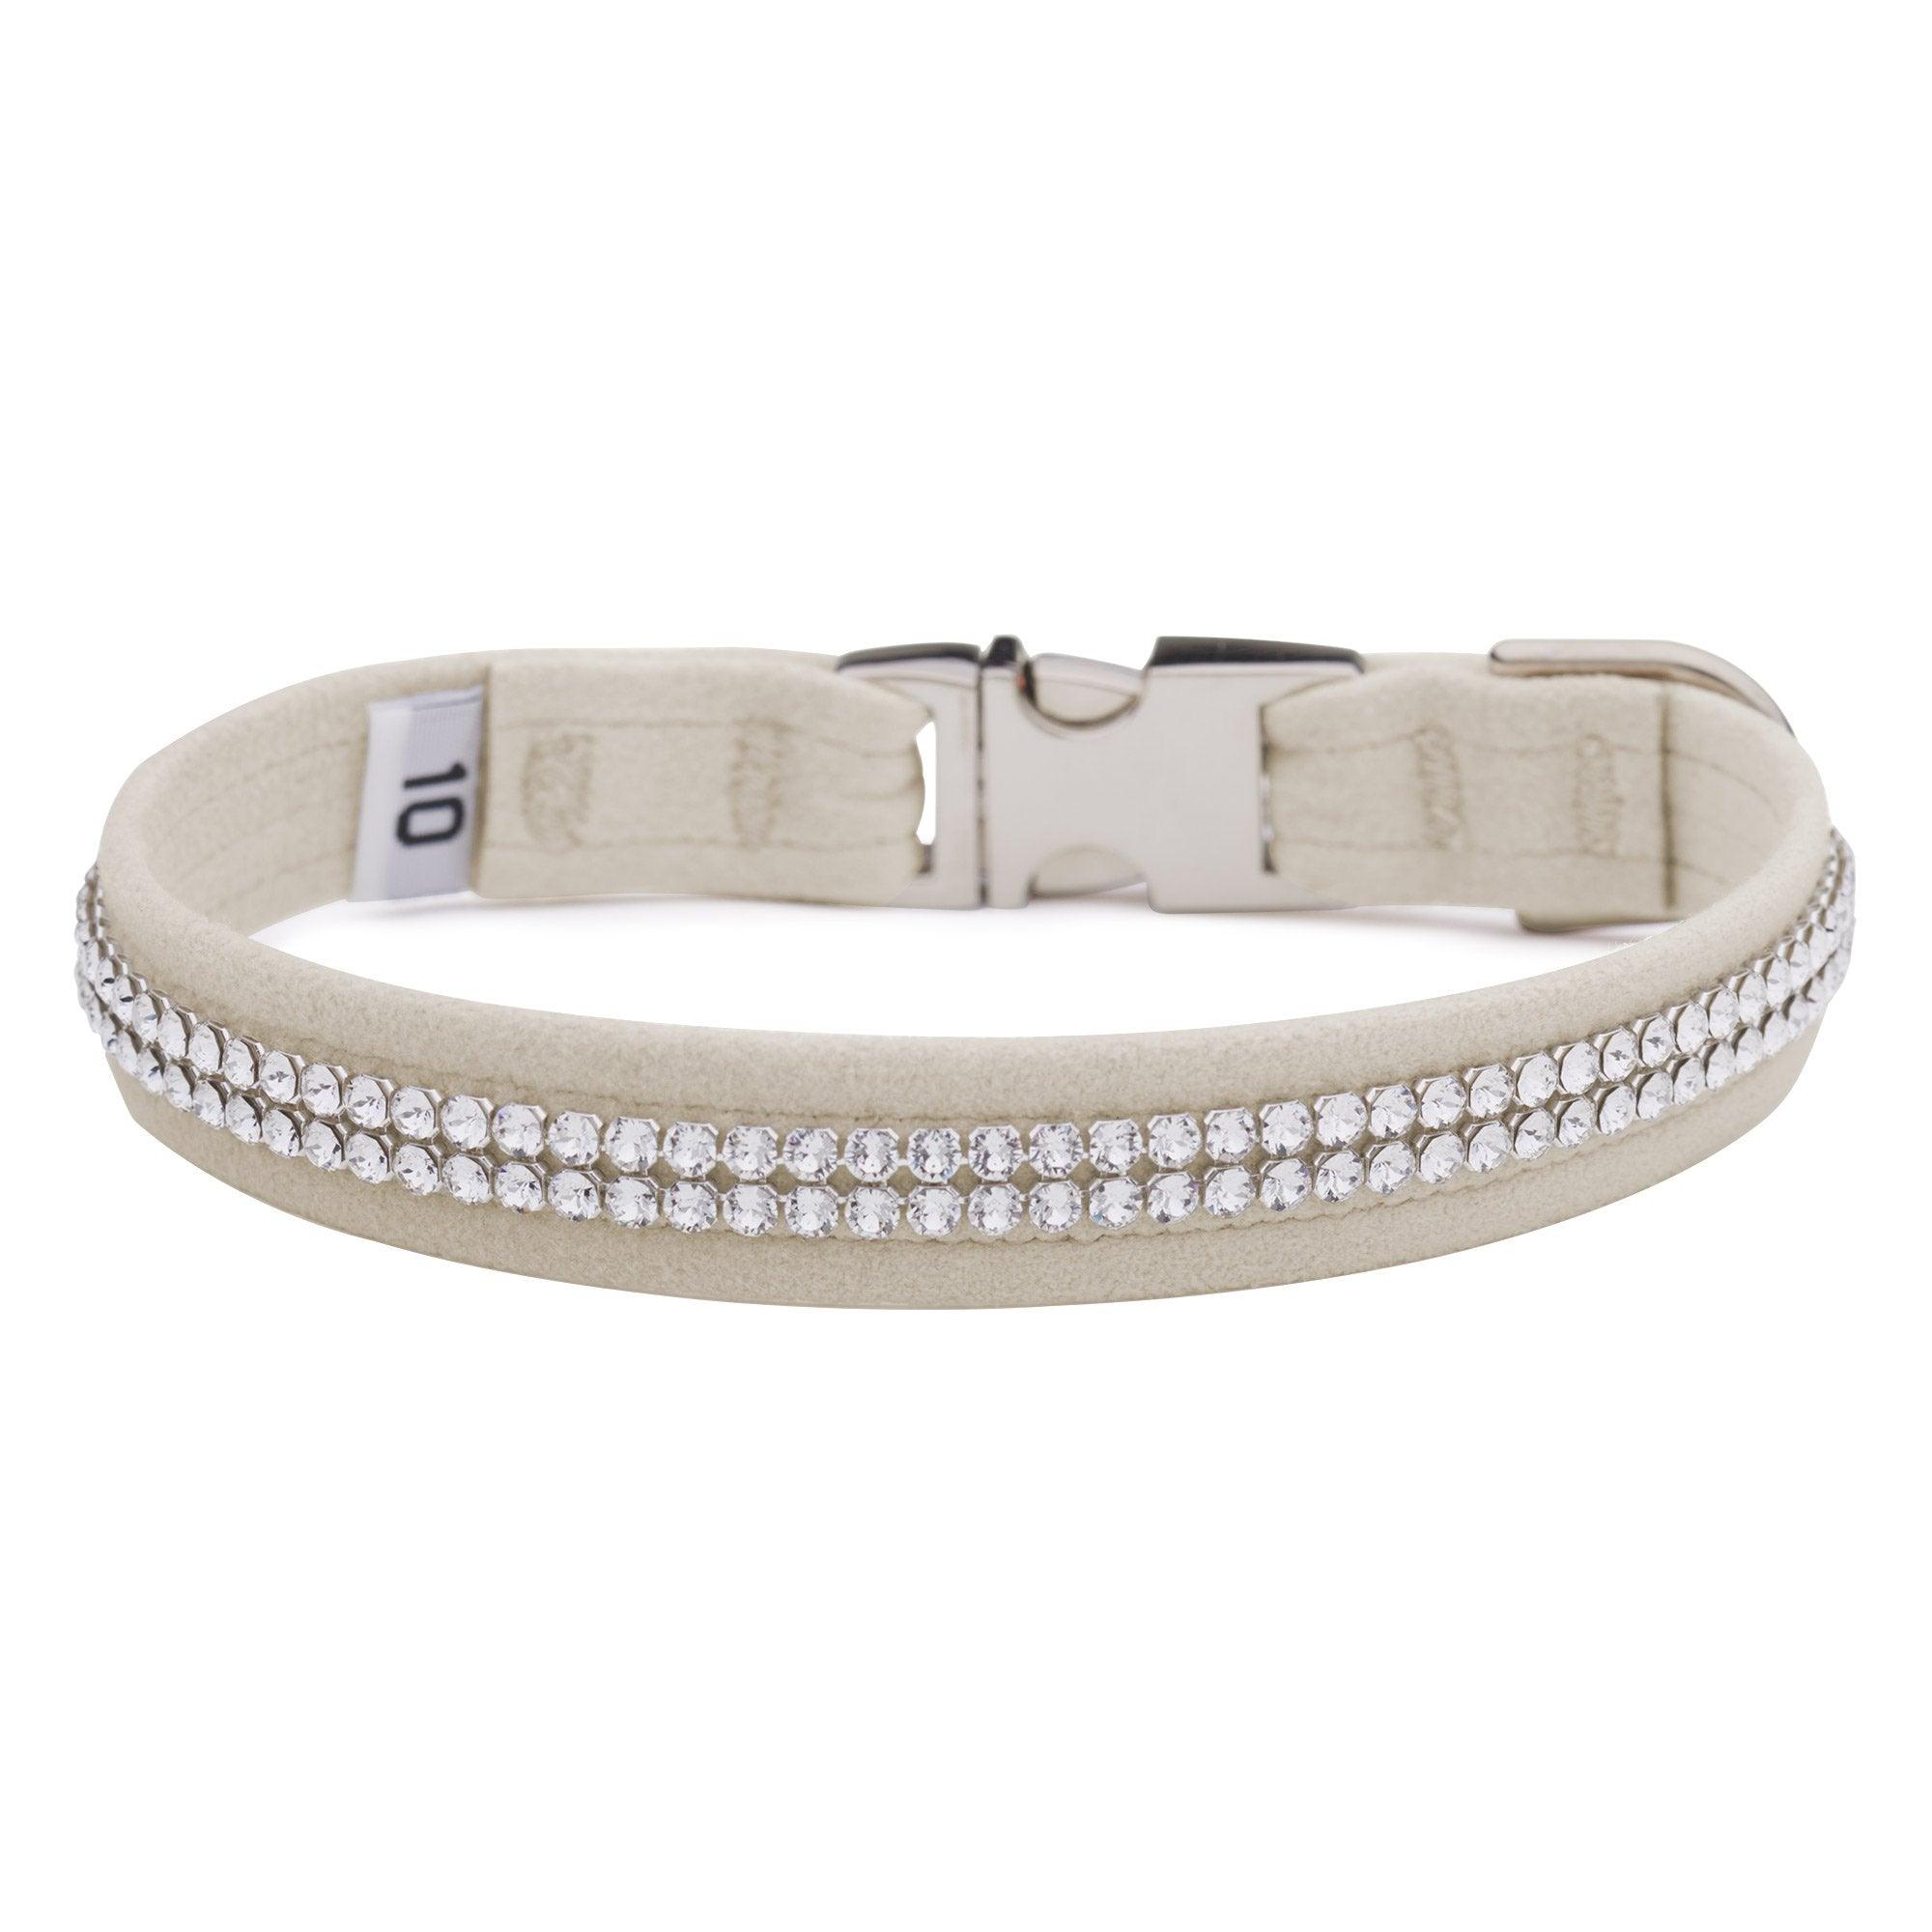 Doe 2 Row Giltmore Perfect Fit Collar - Rocky & Maggie's Pet Boutique and Salon